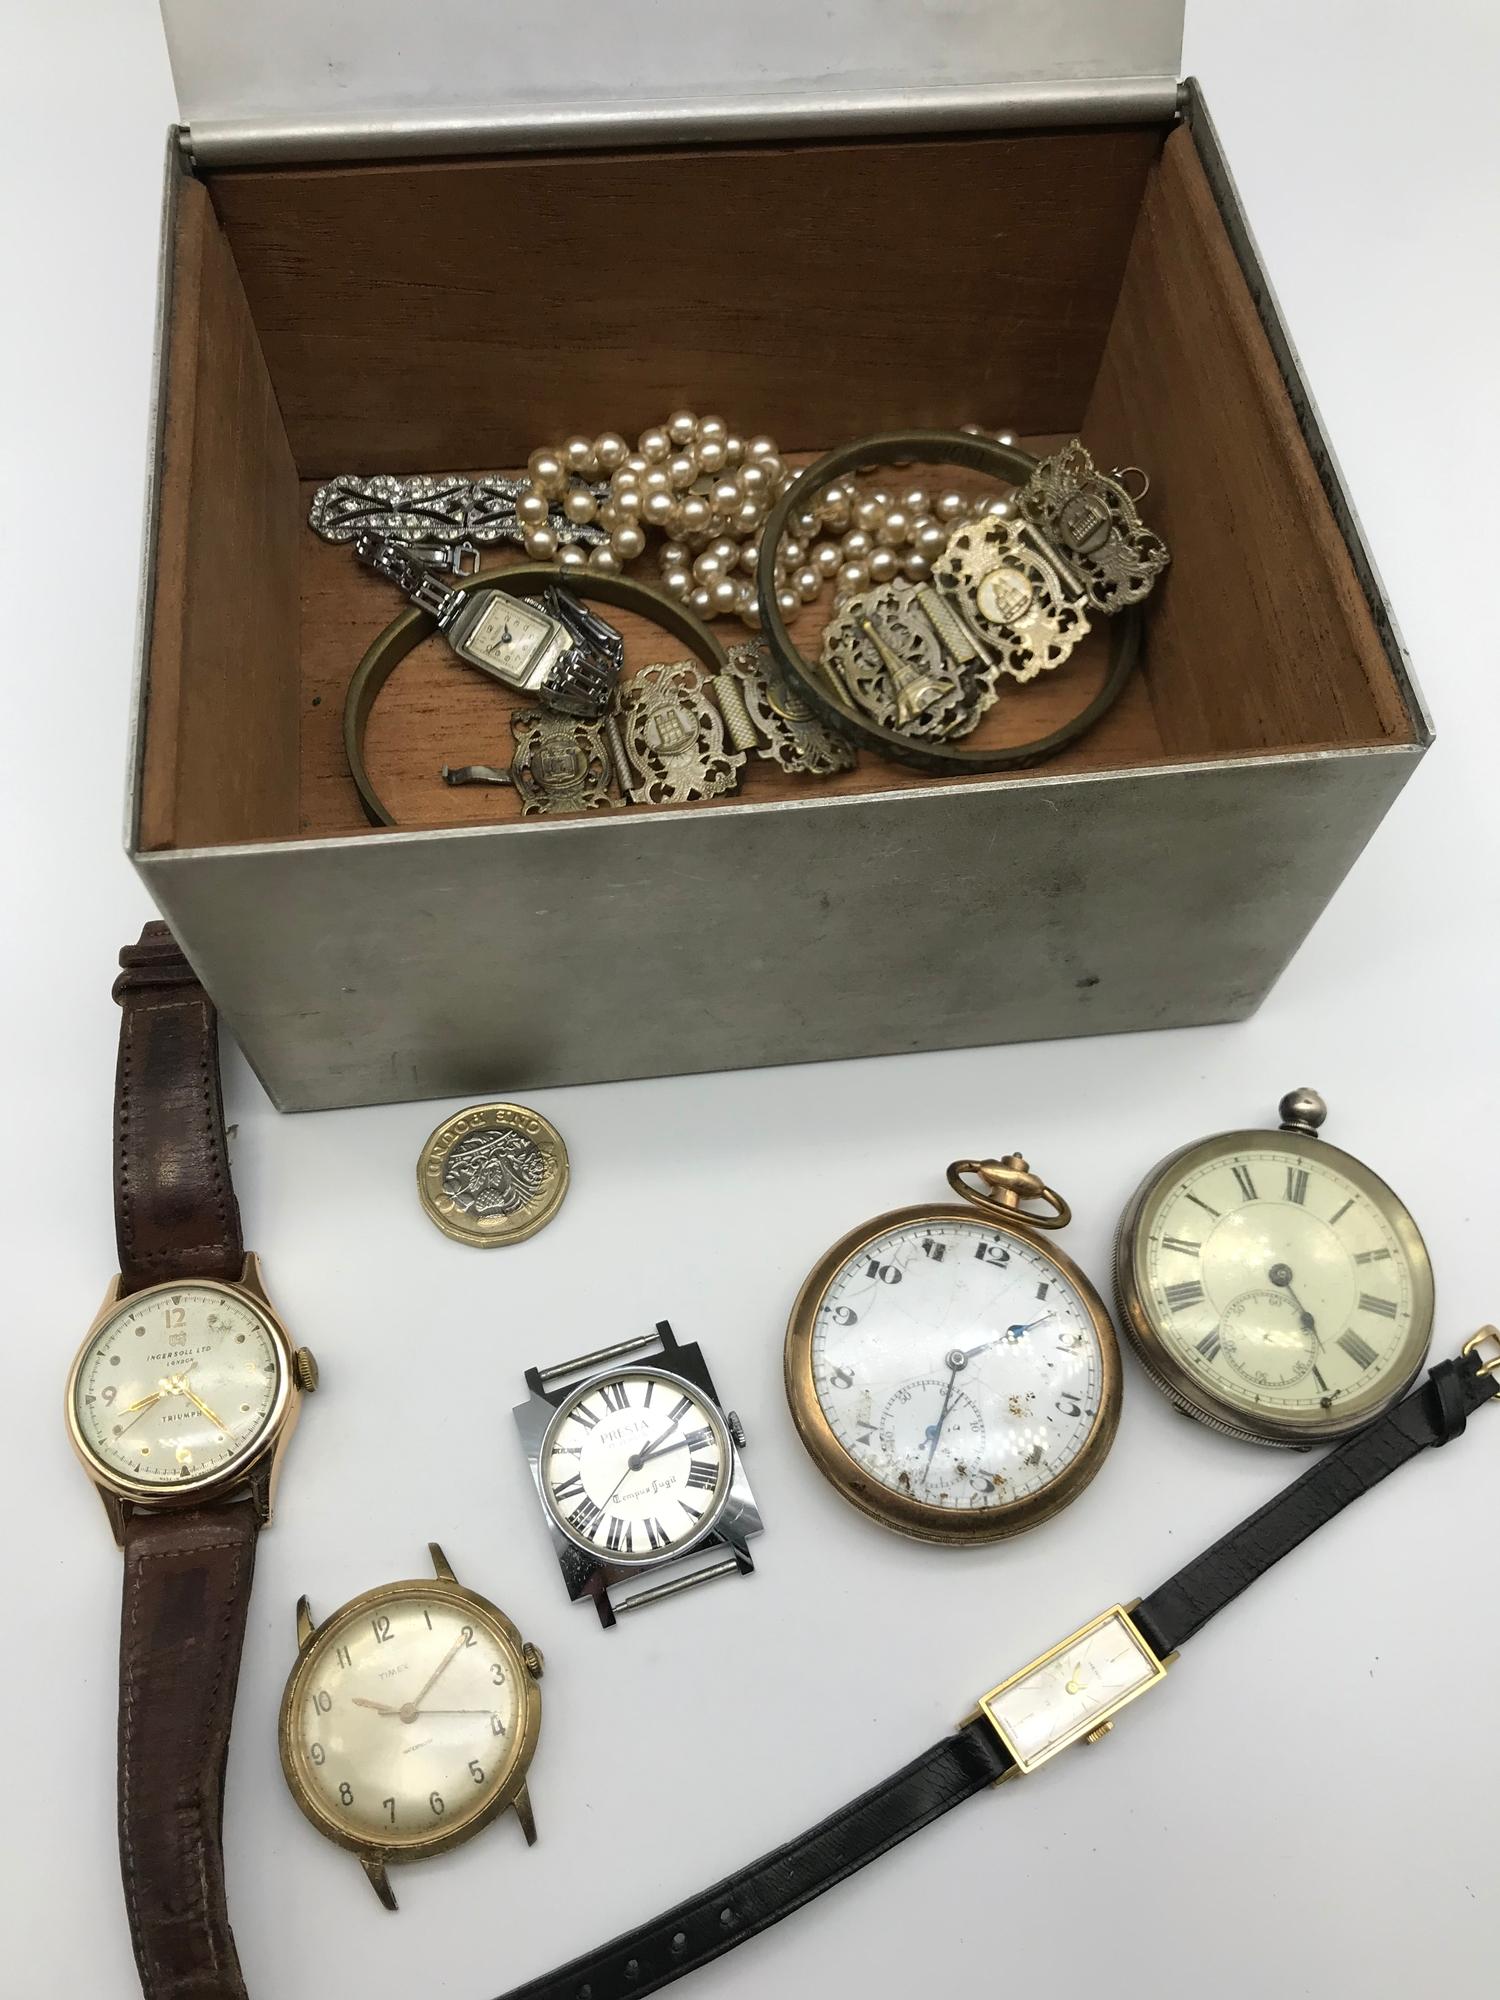 A Vintage box containing various costume jewellery, Vintage watches and pocket watches, Ingersoll